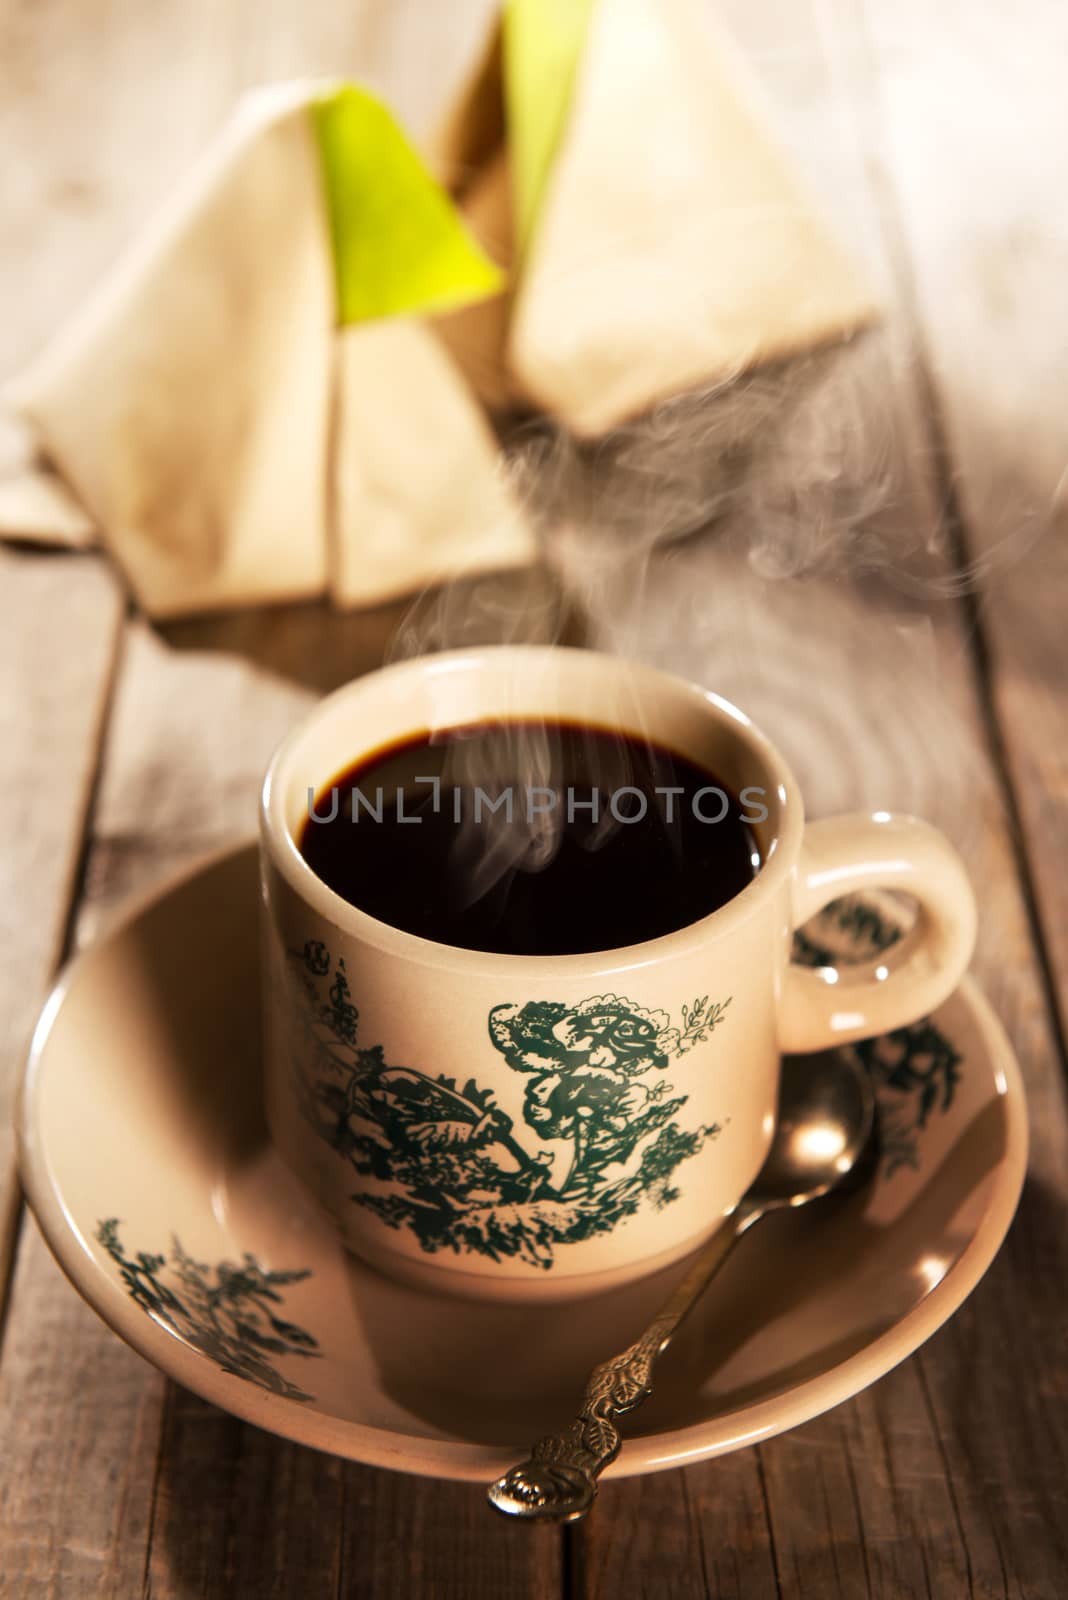 Traditional kopitiam style Malaysian coffee in vintage mug and saucer and nasi lemak. Fractal on the cup is generic print. Soft focus dramatic ambient light over wood table.